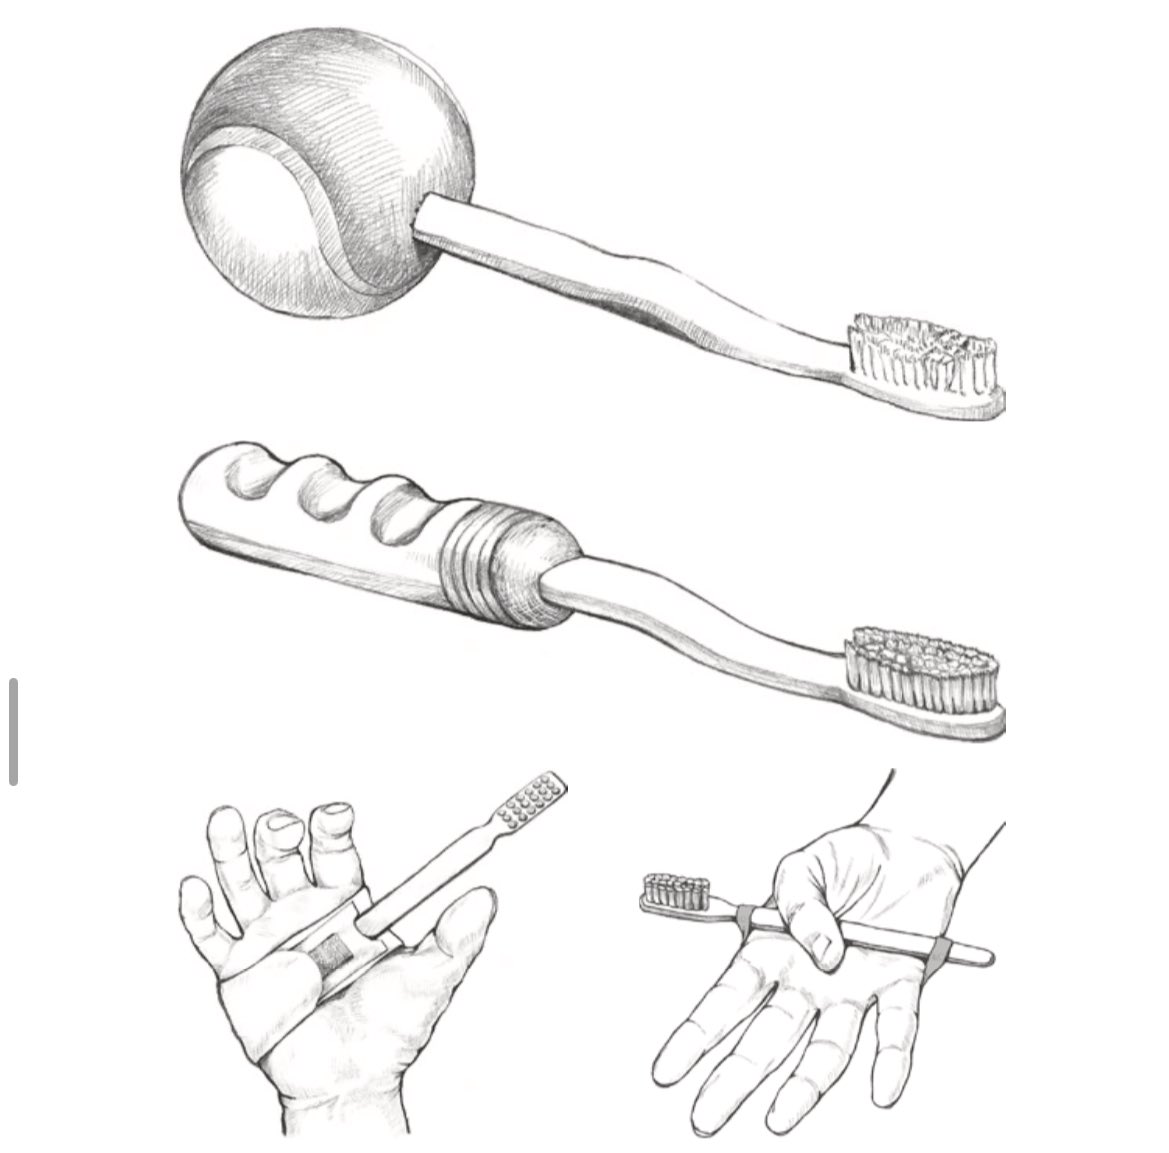 Toothbrushes adapted for CSHCN

#Dental_by_Hadeel